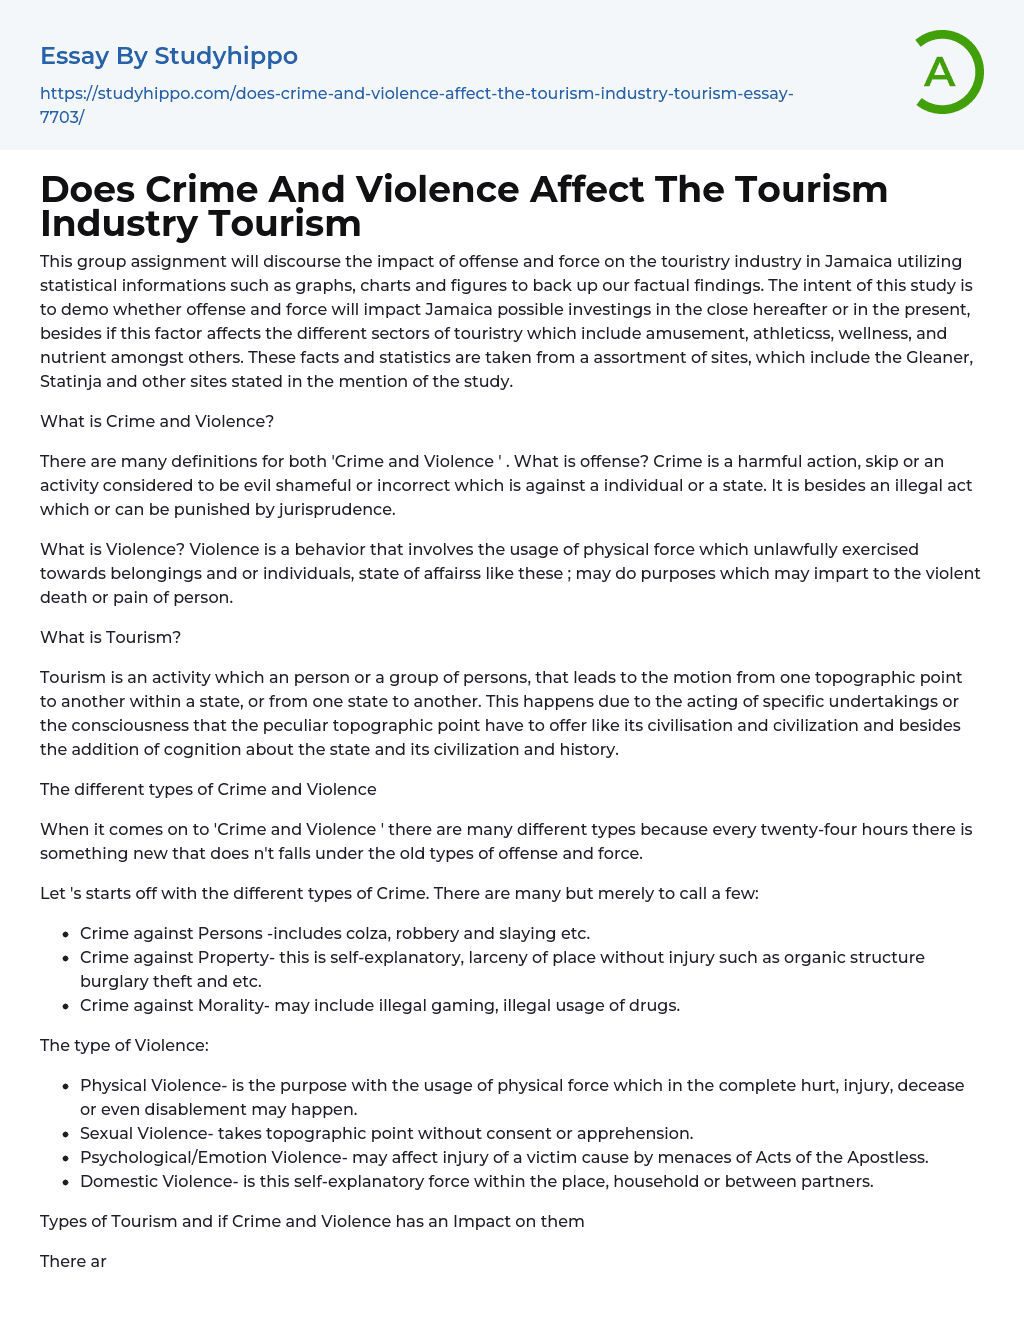 Does Crime And Violence Affect The Tourism Industry Tourism Essay Example